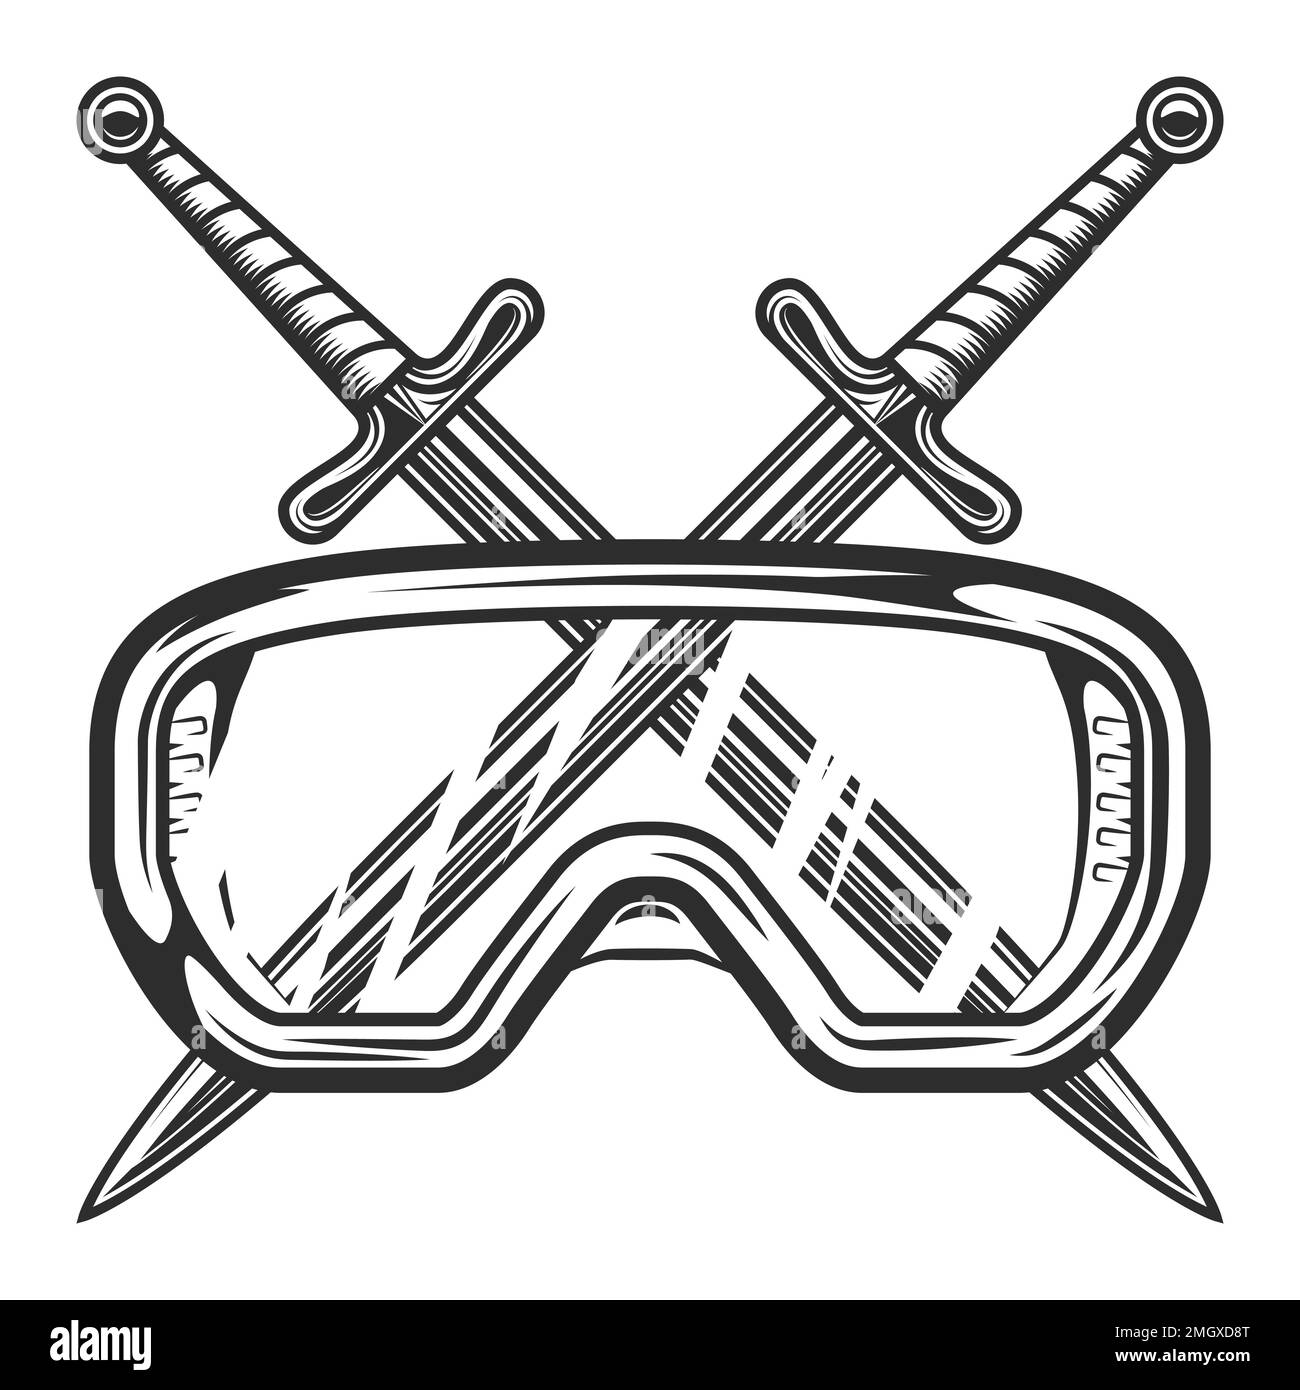 Crossed swords illustration Black and White Stock Photos & Images - Alamy